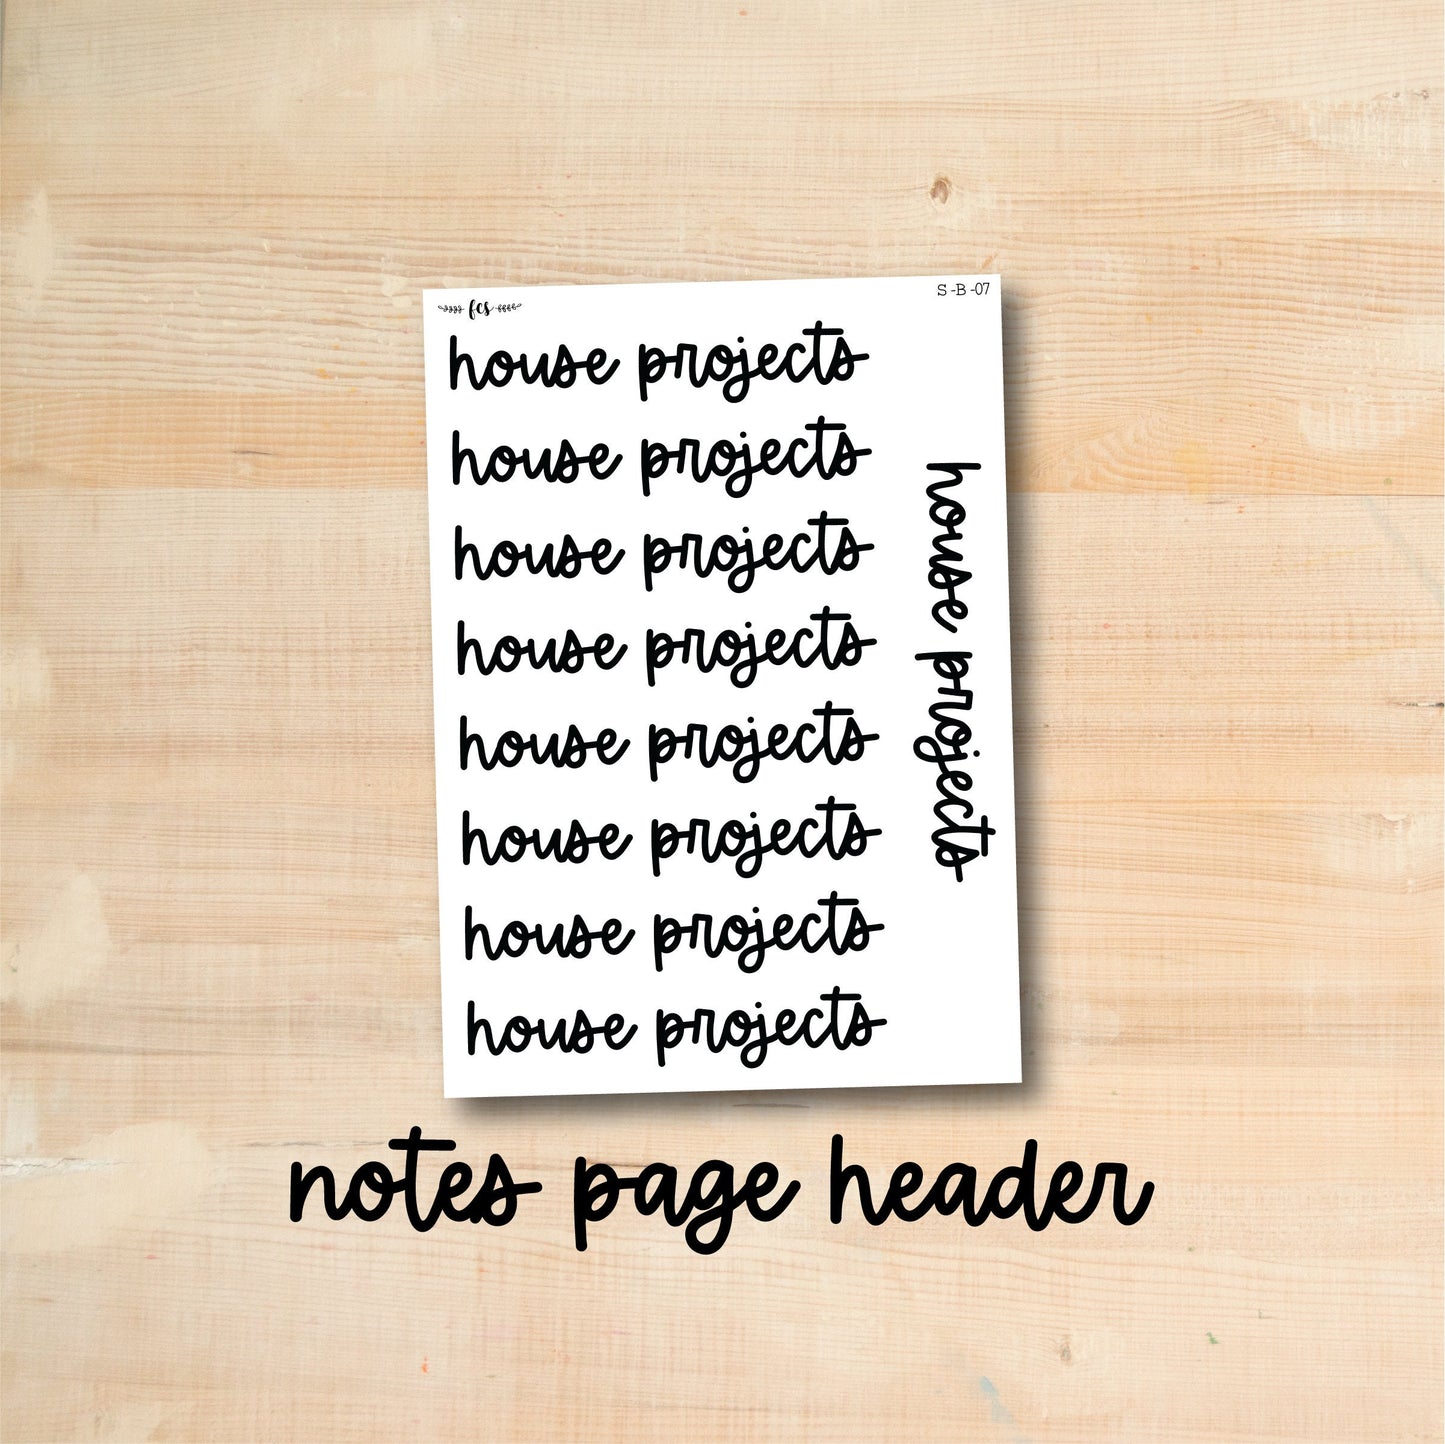 S-B-07 || HOUSE PROJECTS notes page header script stickers